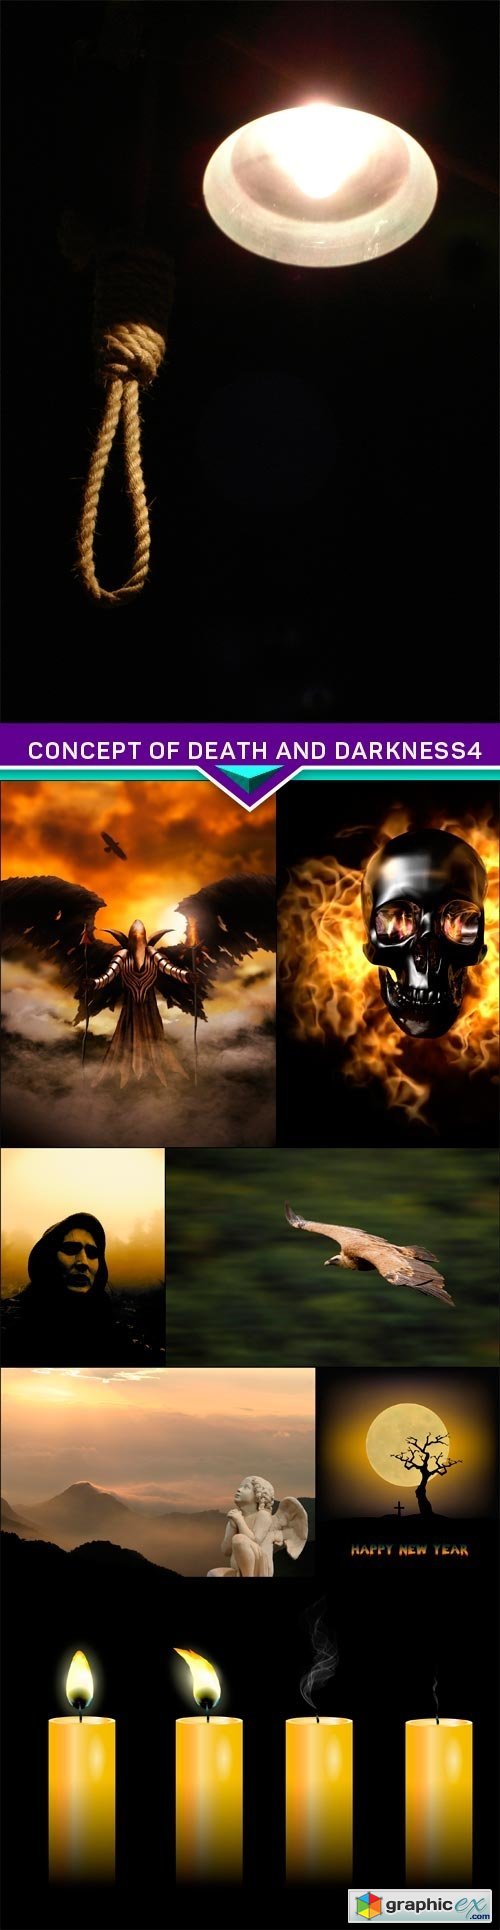 Concept of death and darkness4 8x JPEG